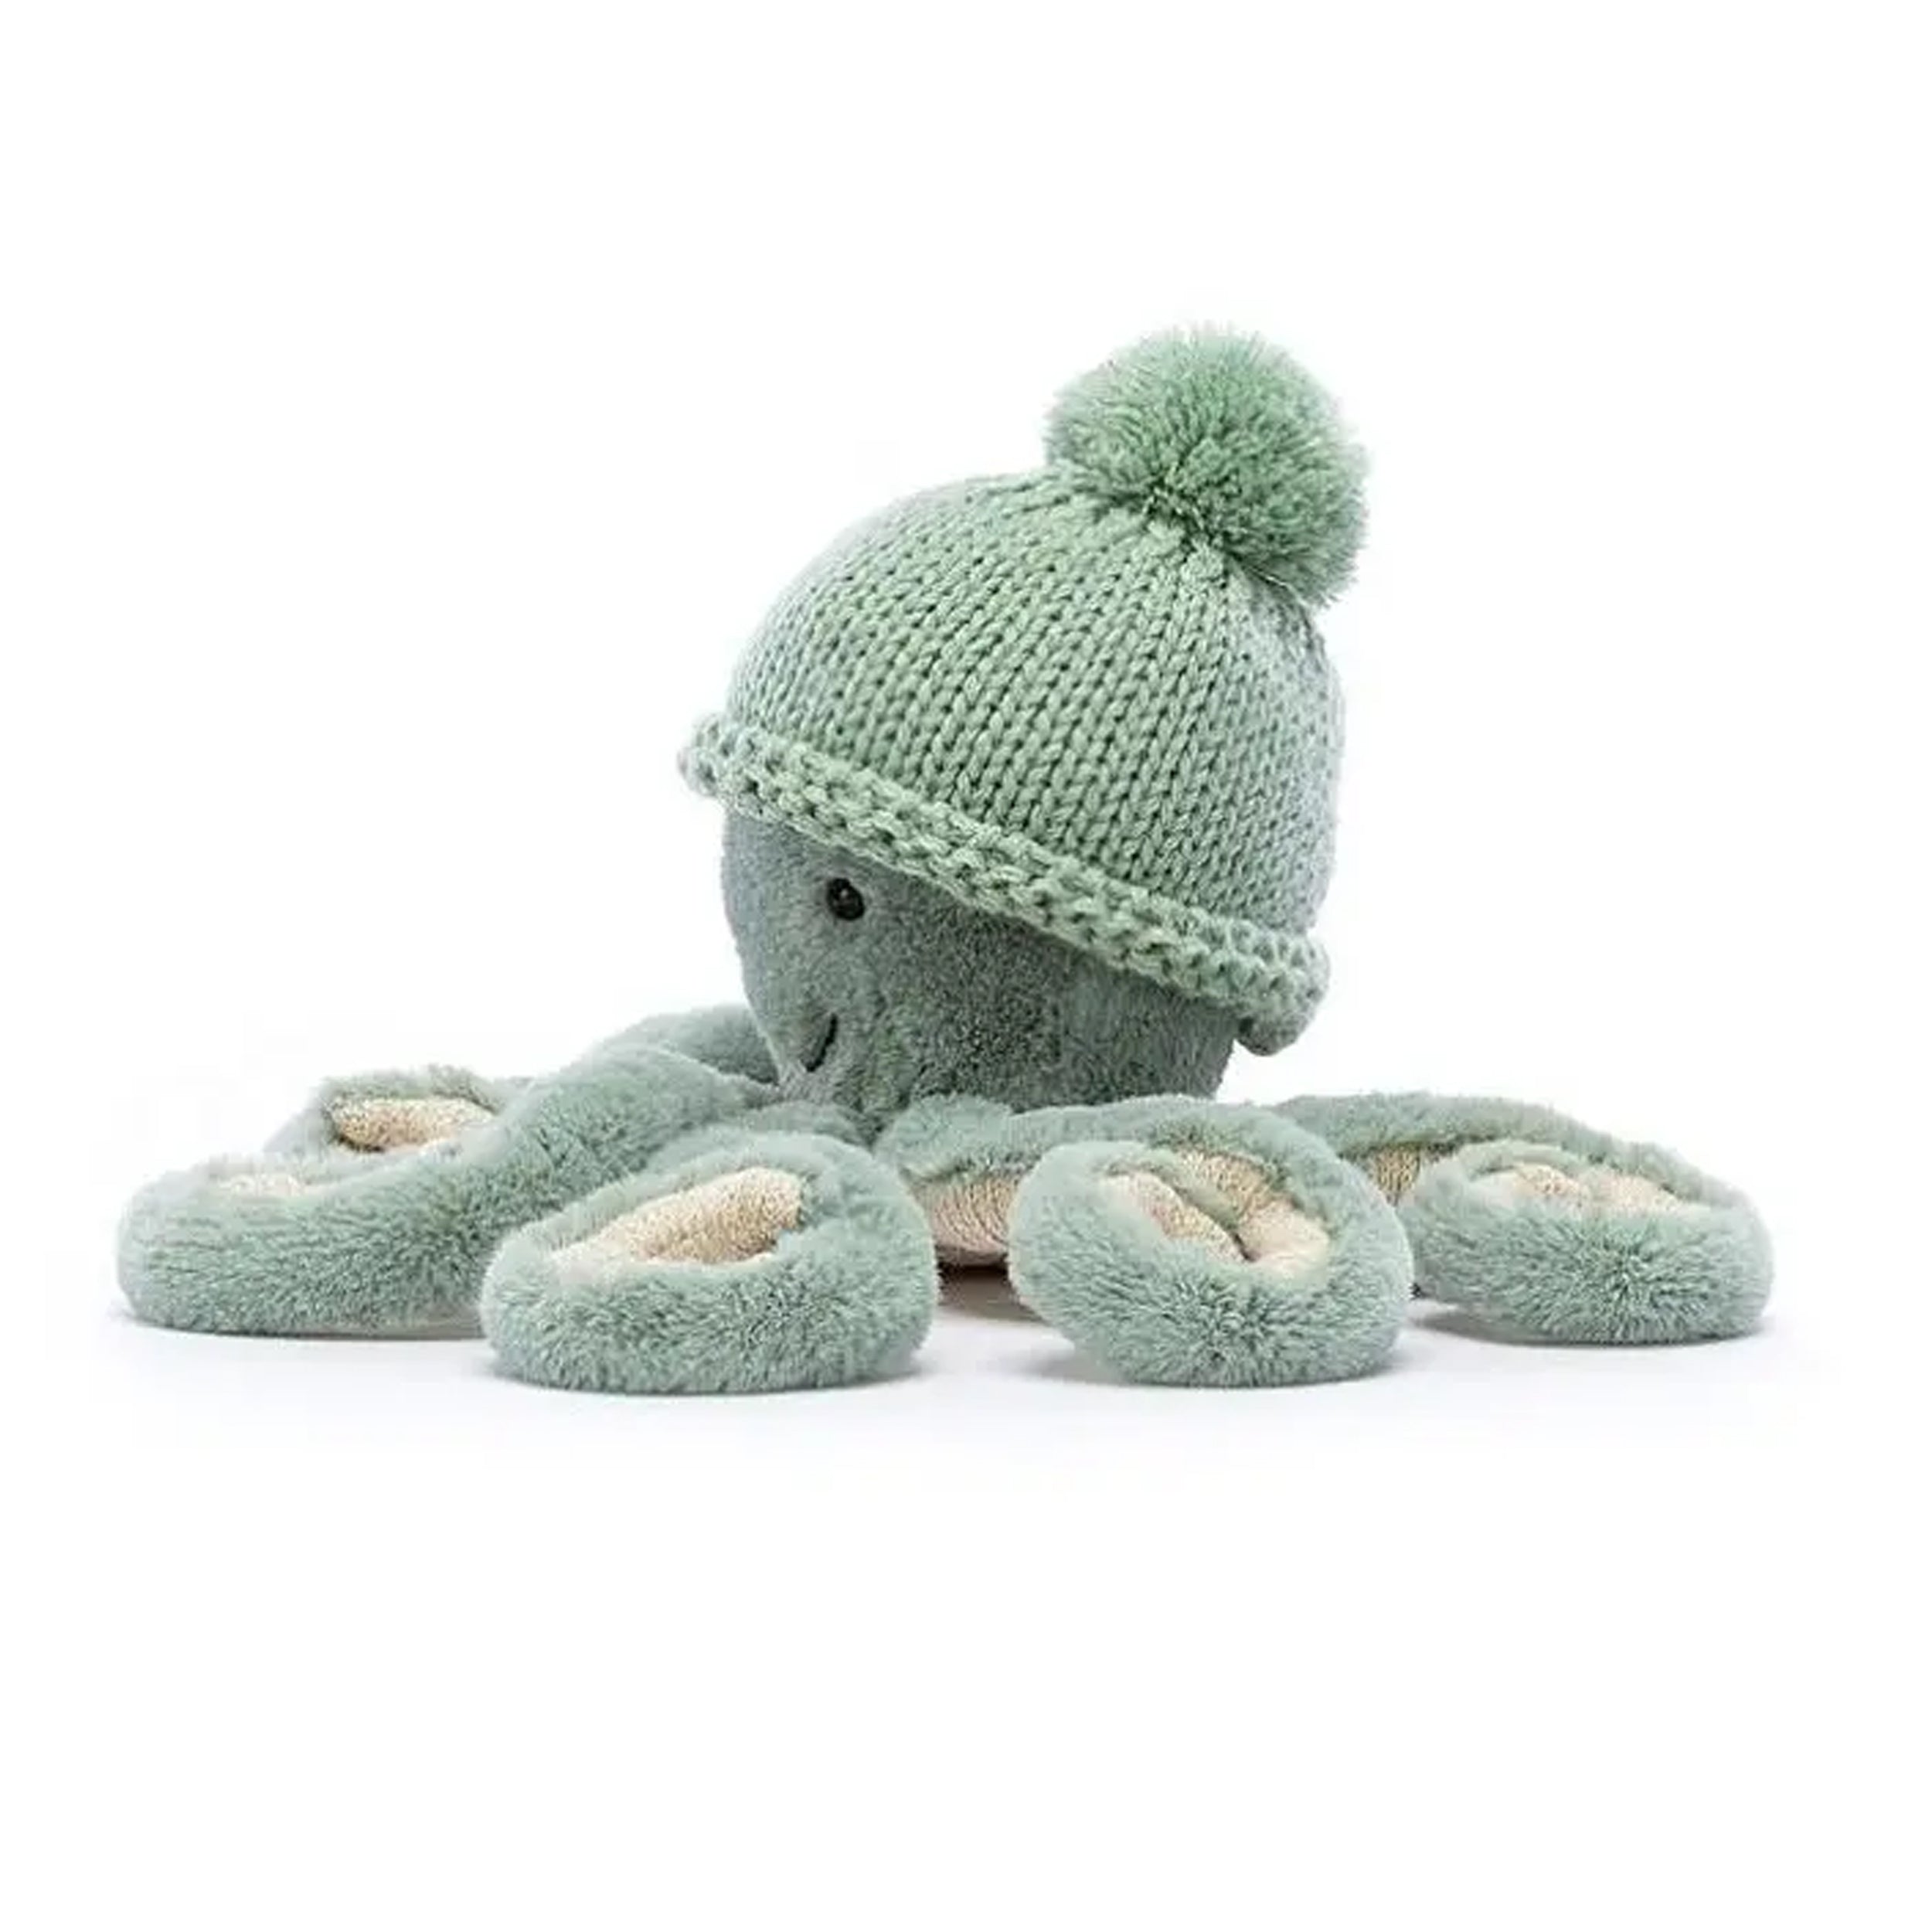 Cute and Cuddly Octopus Plush Soft Stuffed Toy - Perfect for Kids and Adults